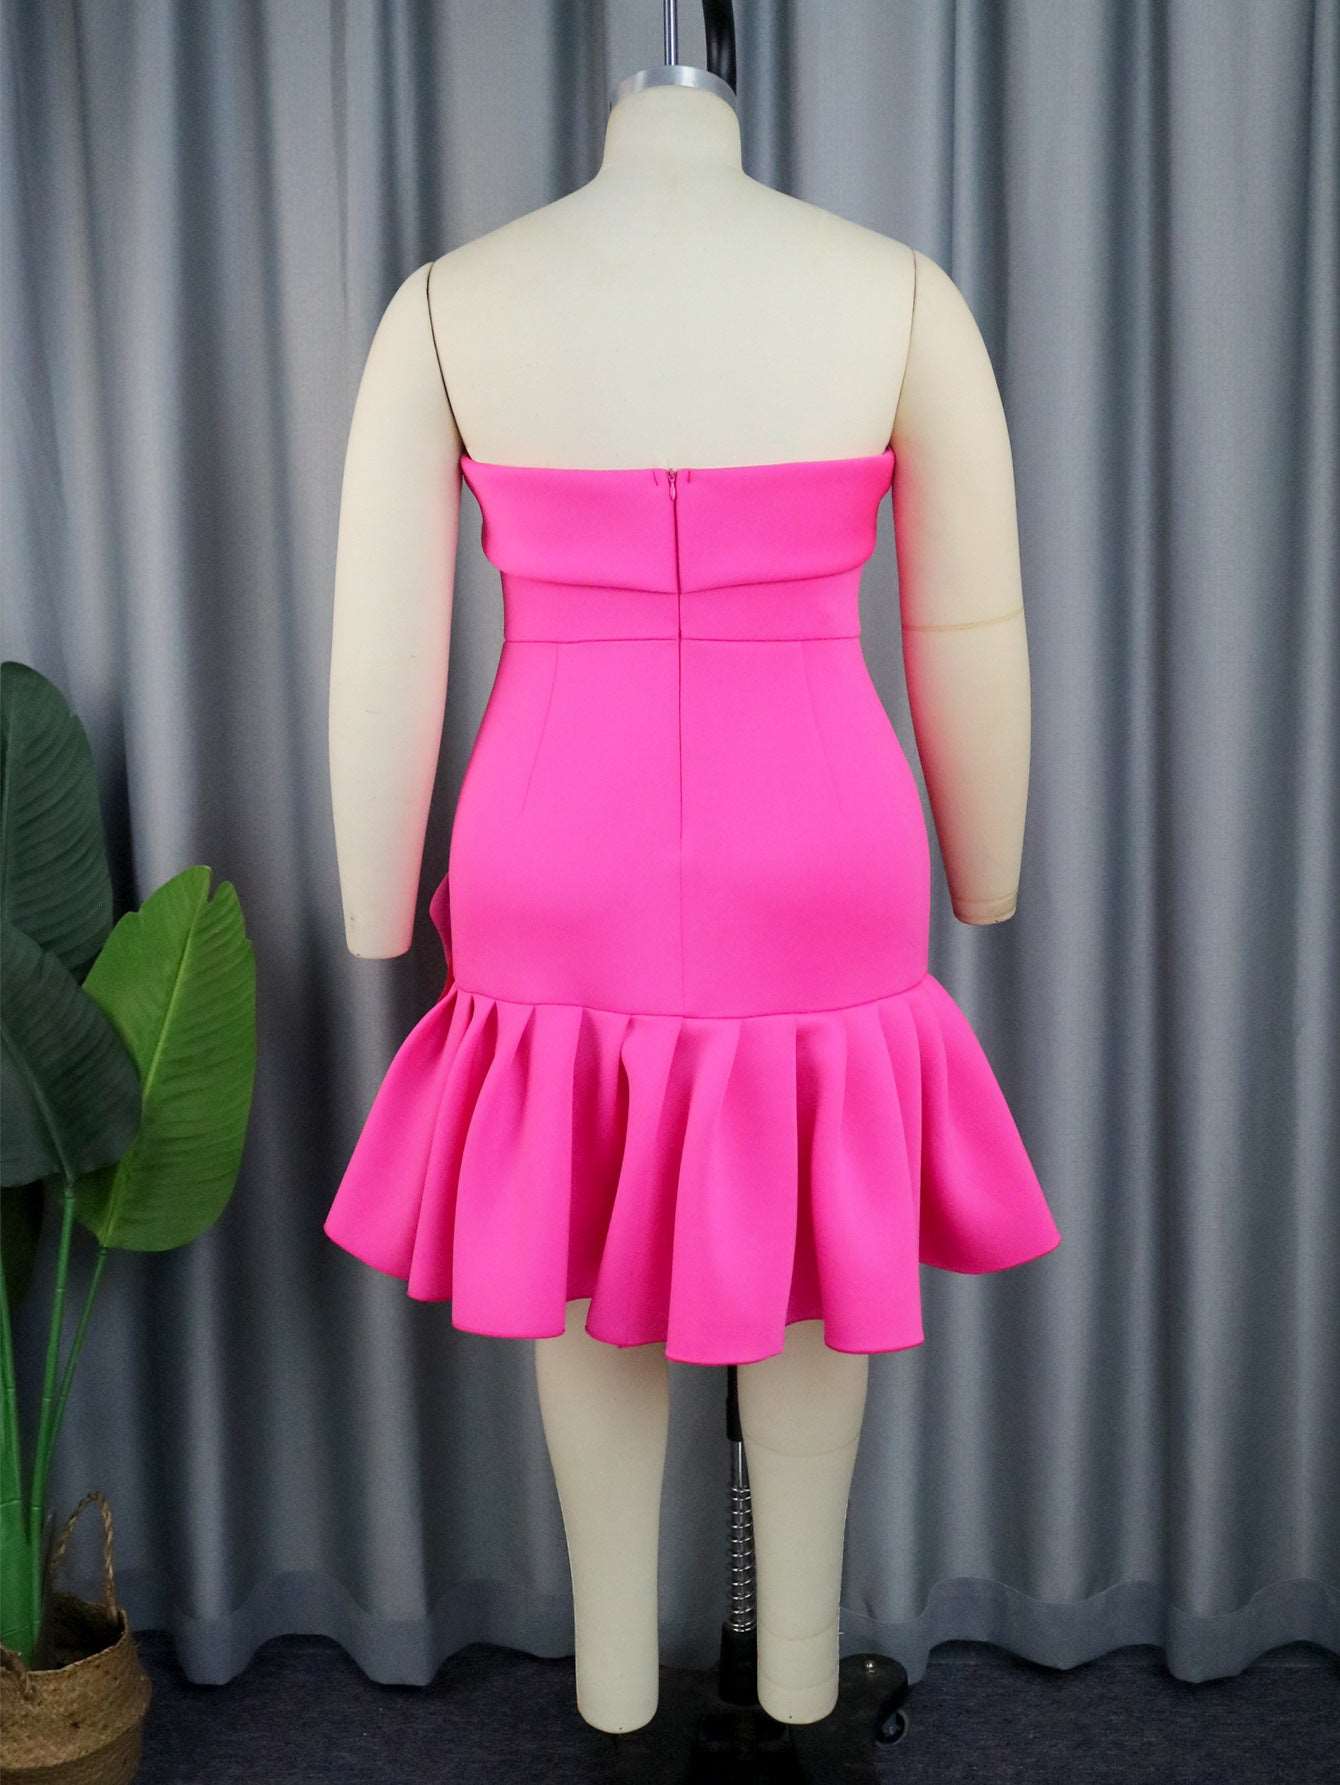 Hot Pink Strapless Flower Ruched mini Dress